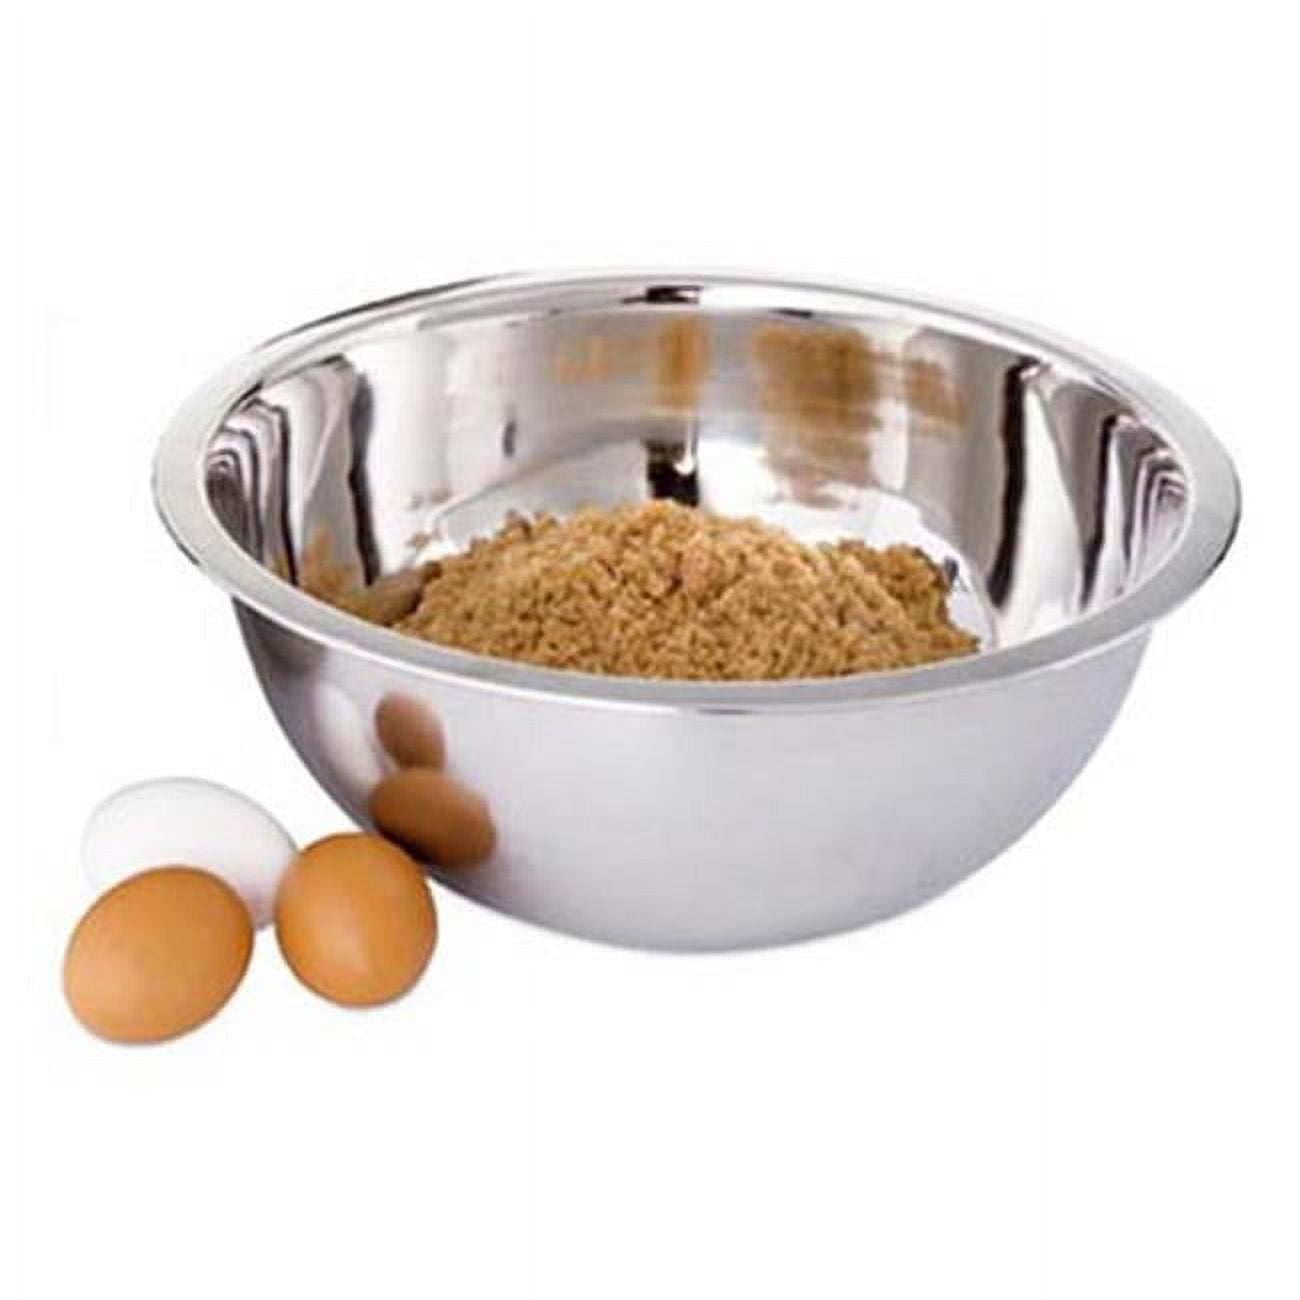 8 Qt Stainless Steel Mixing Bowl - GoodCook